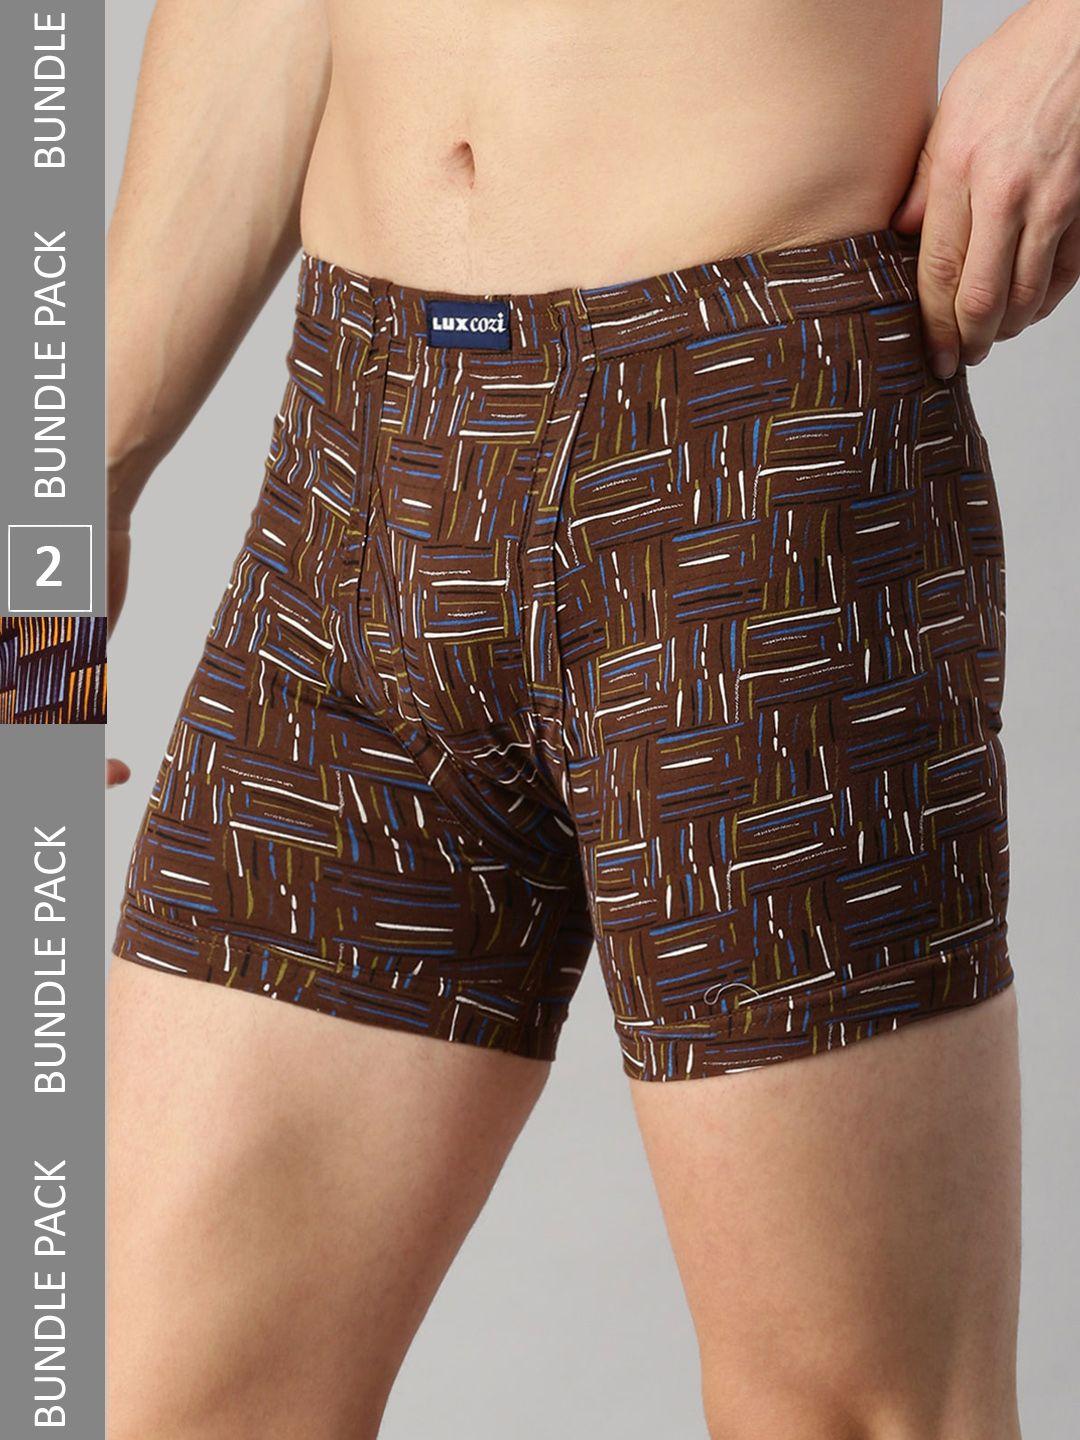 lux cozi men pack of 2 assorted printed cotton trunks cozi_bigshot_longs_print_ast5_2pc